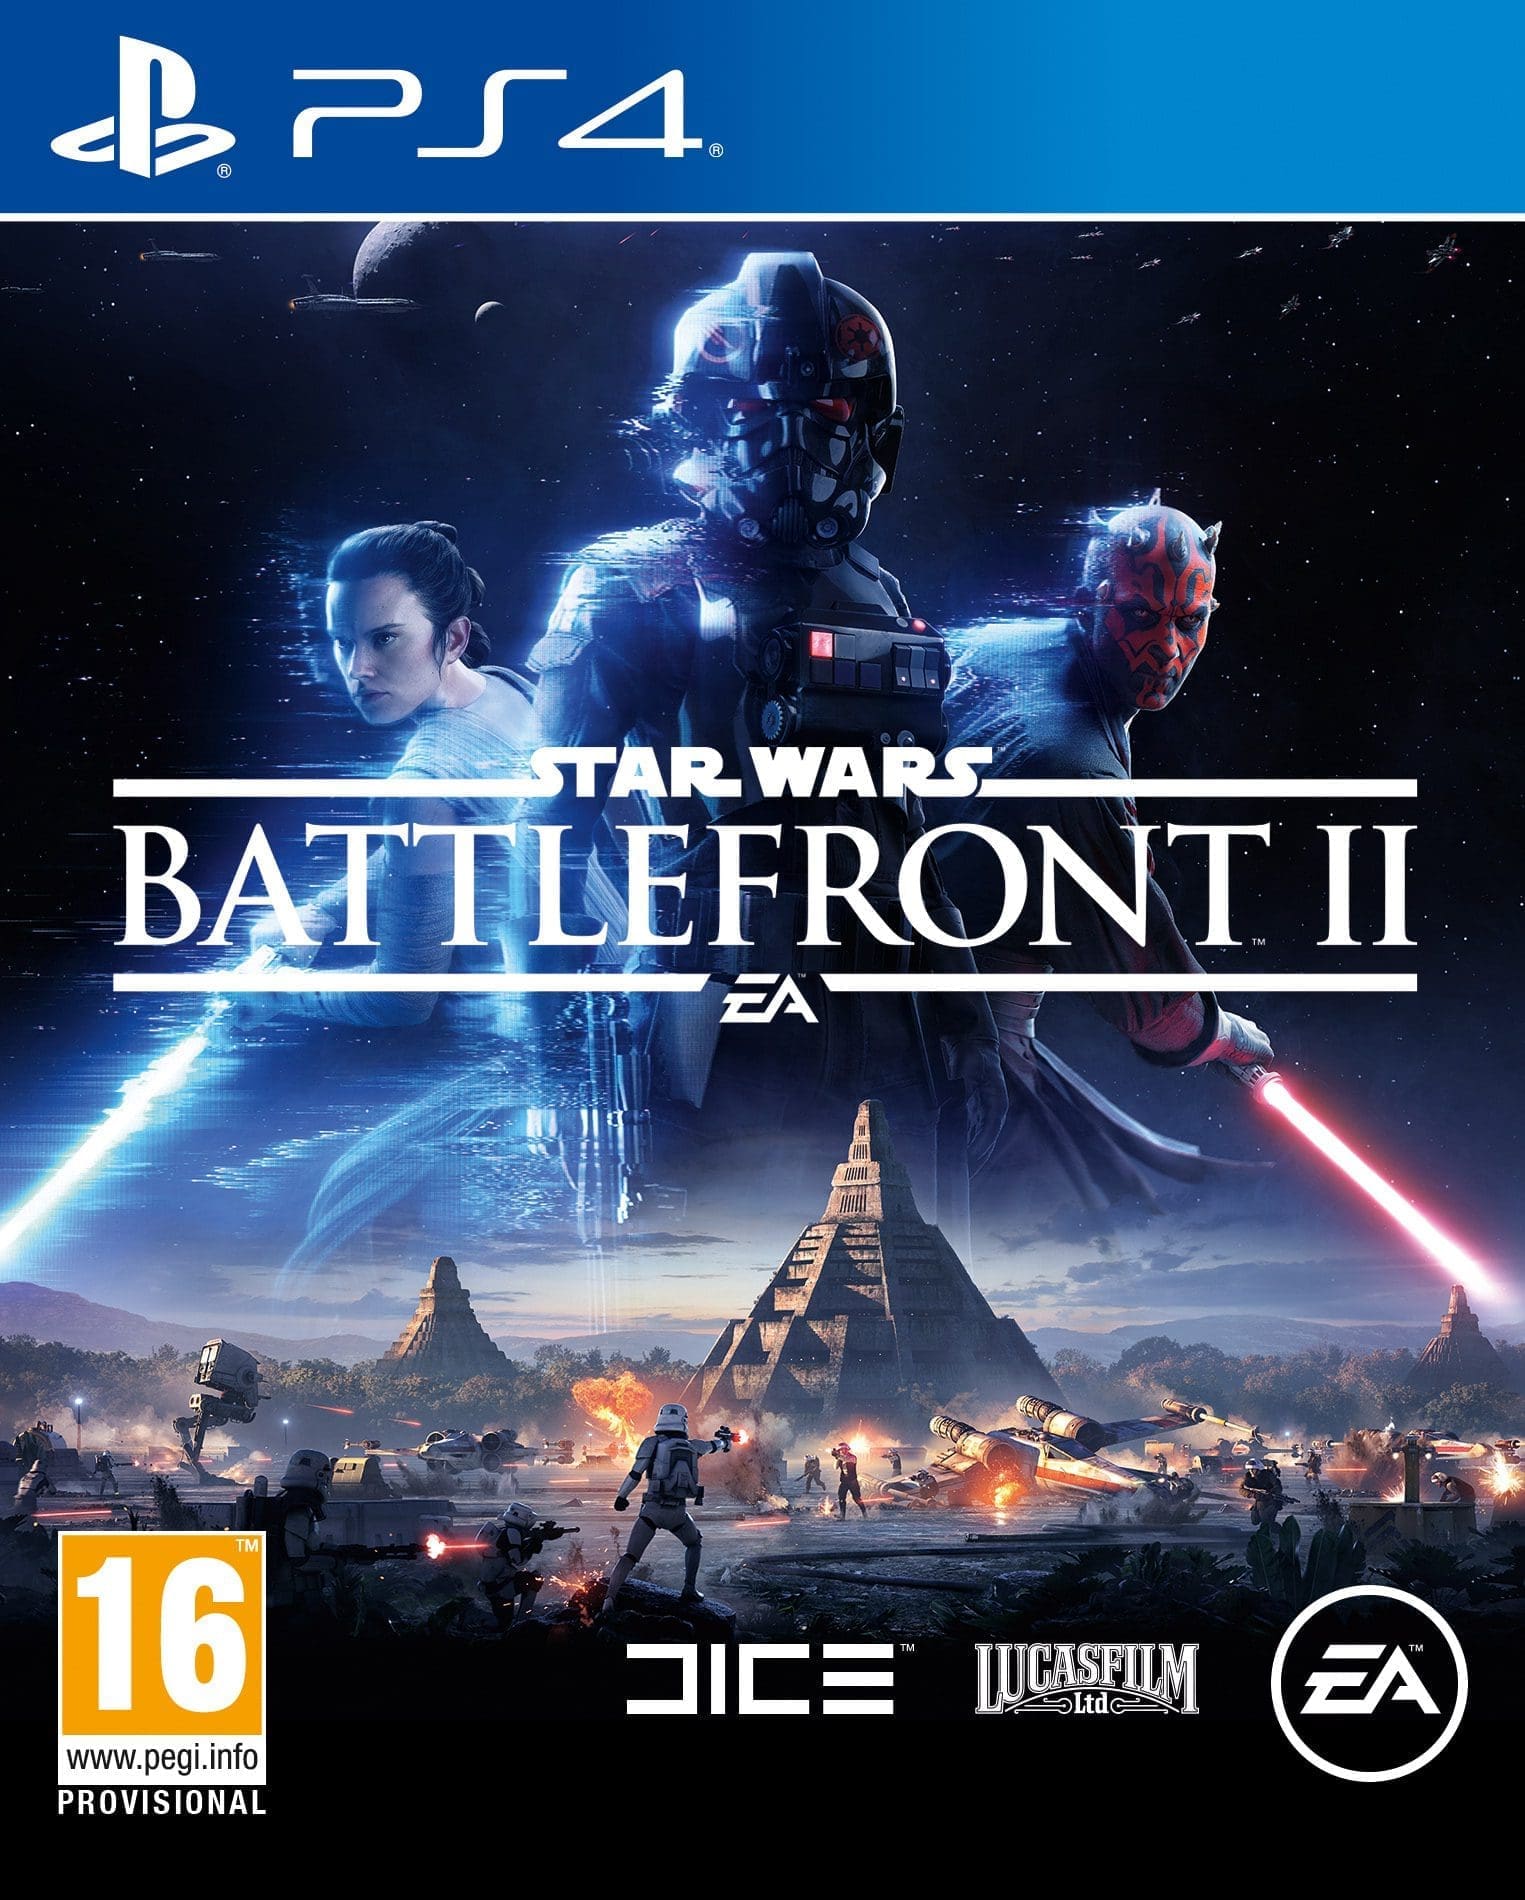 Battlefront II, Criterion, Dice, EA Games, gaming news, lucasfilm, Motive, Origin, Playstation 4, star wars, Star Wars Battlefront II, Star Wars Celebration, Xbox One